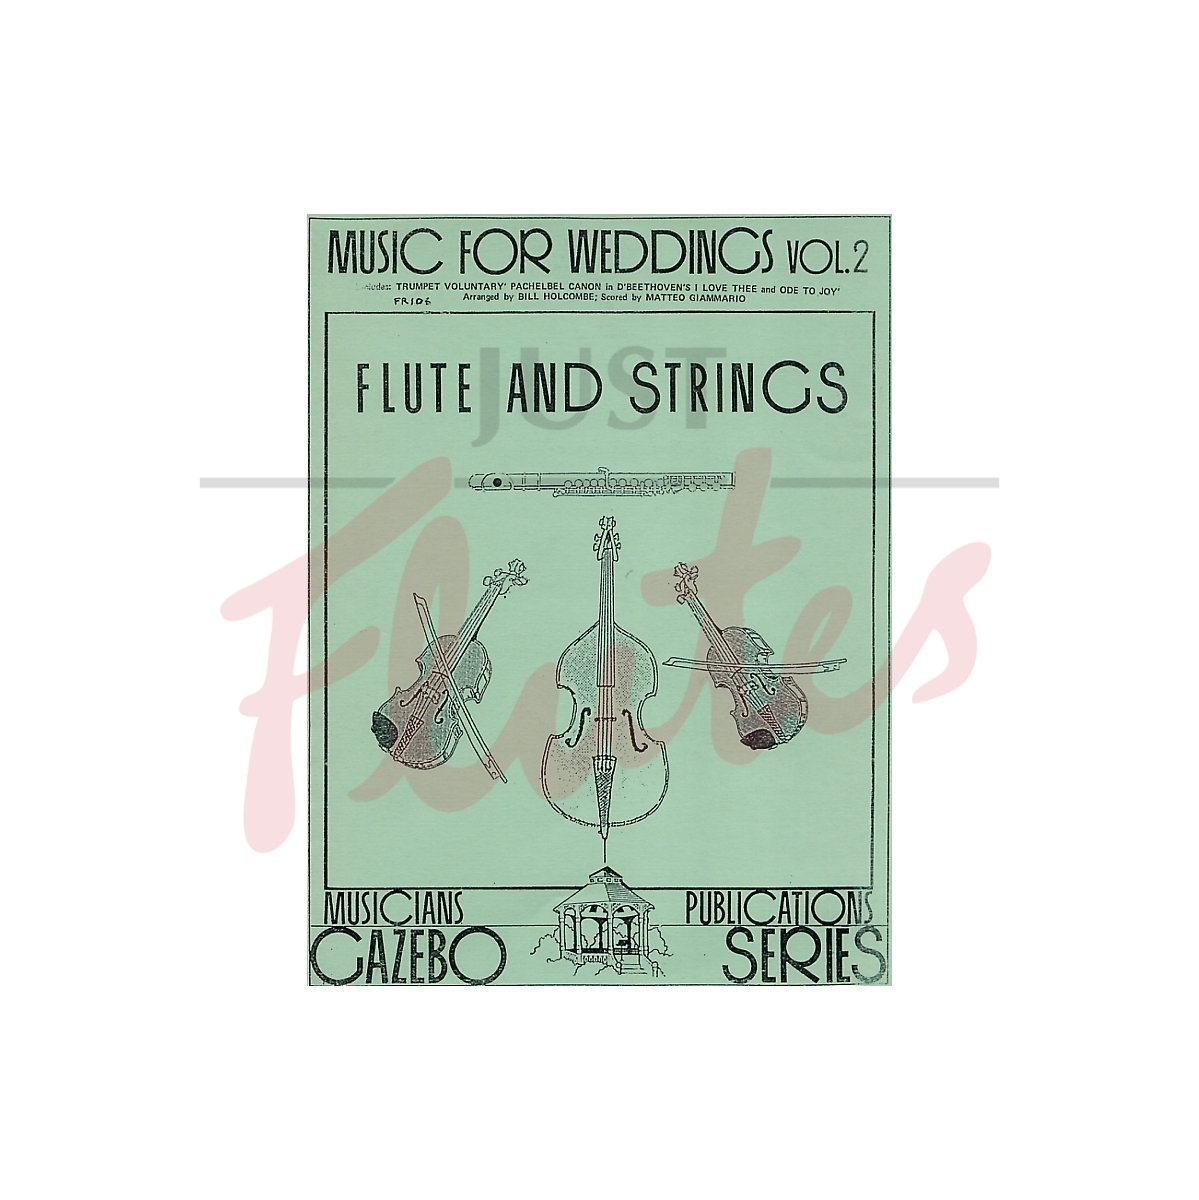 Music for Weddings, Vol 2 [Flute and Strings]